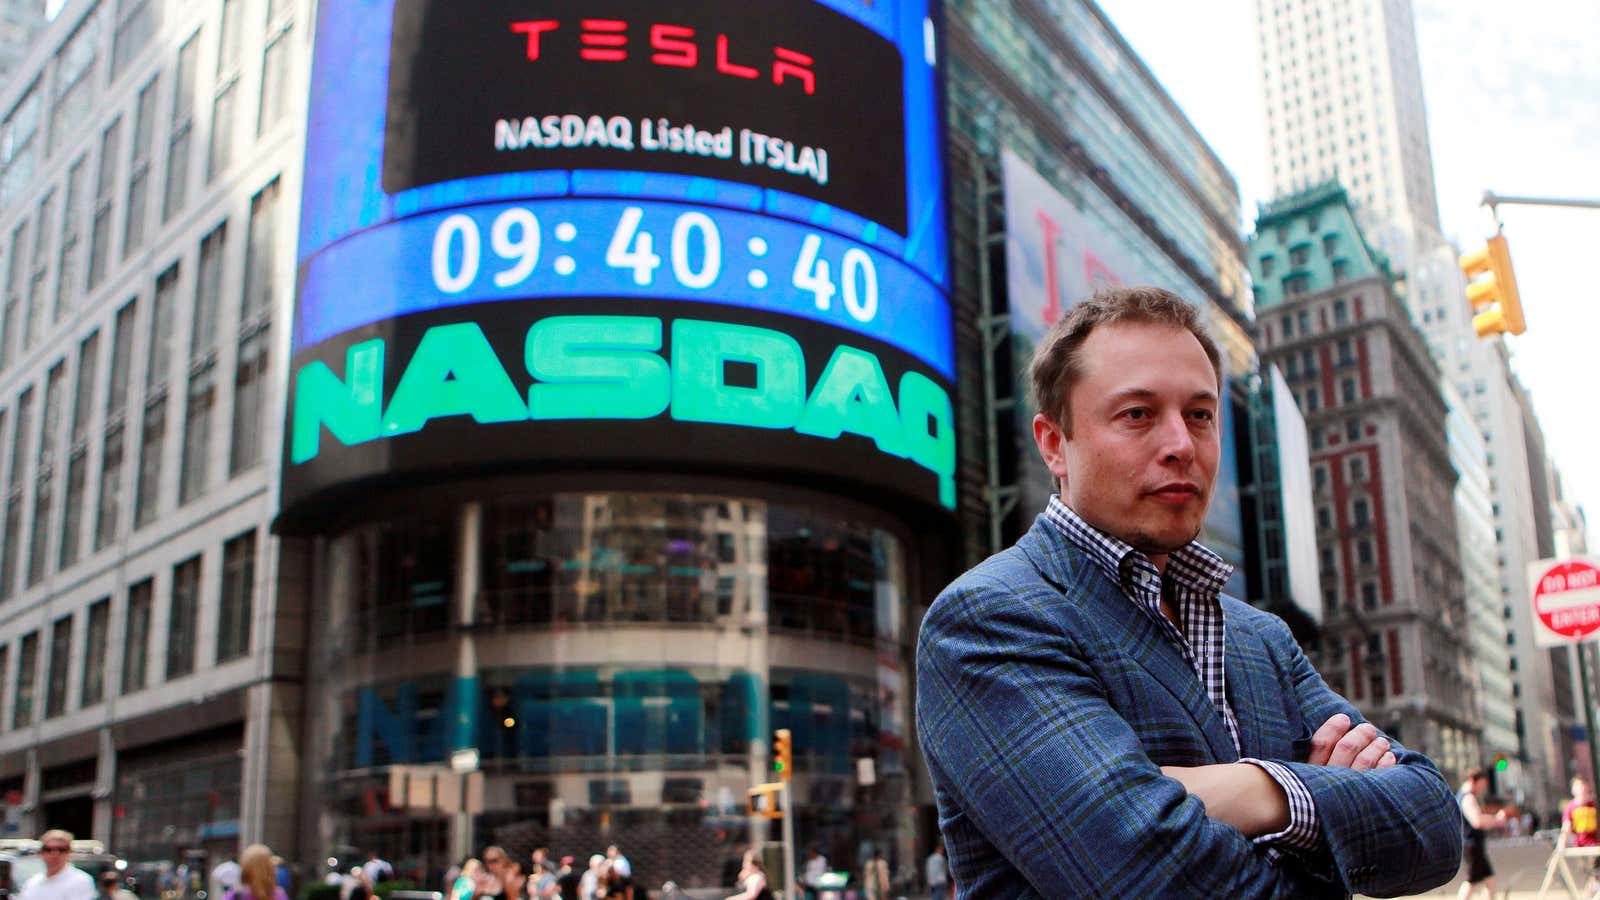 Tesla’s share price has skyrocketed over the past year.